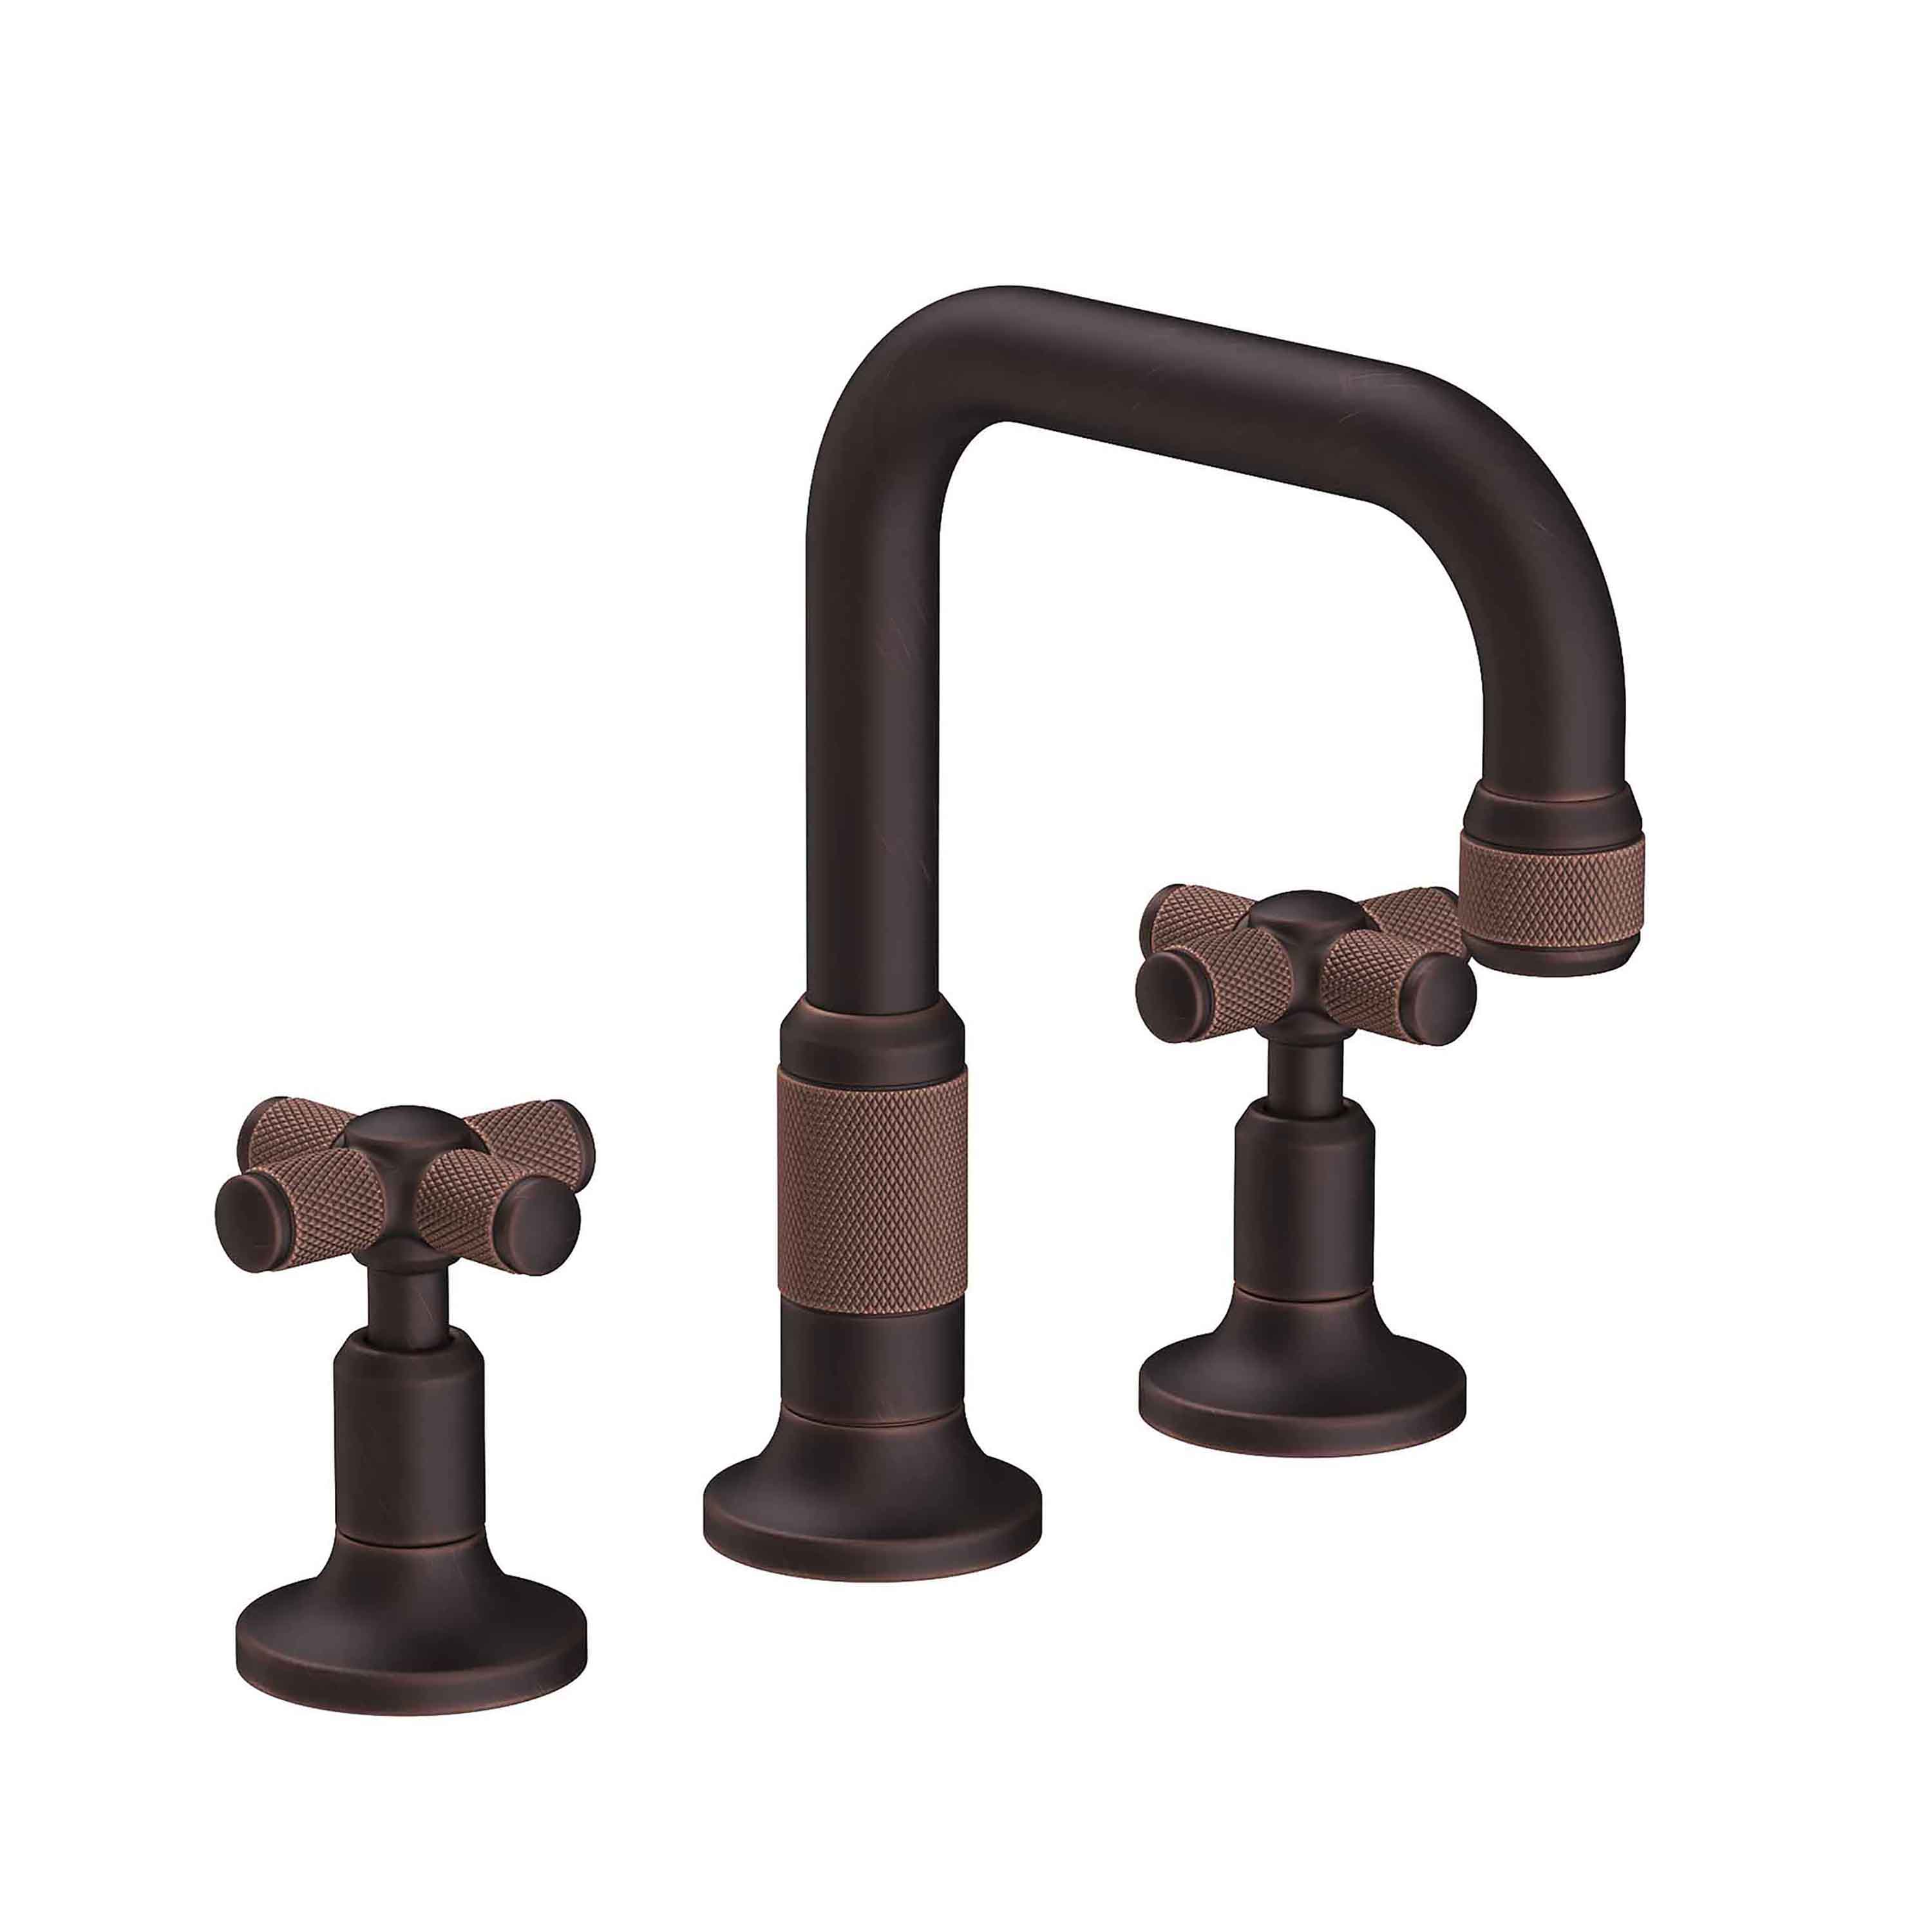 Newport Brass 3290/24S Satin Gold (PVD) Muncy 1.2 GPM Deck Mounted  Widespread Bathroom Faucet with Pop-Up Drain Assembly 